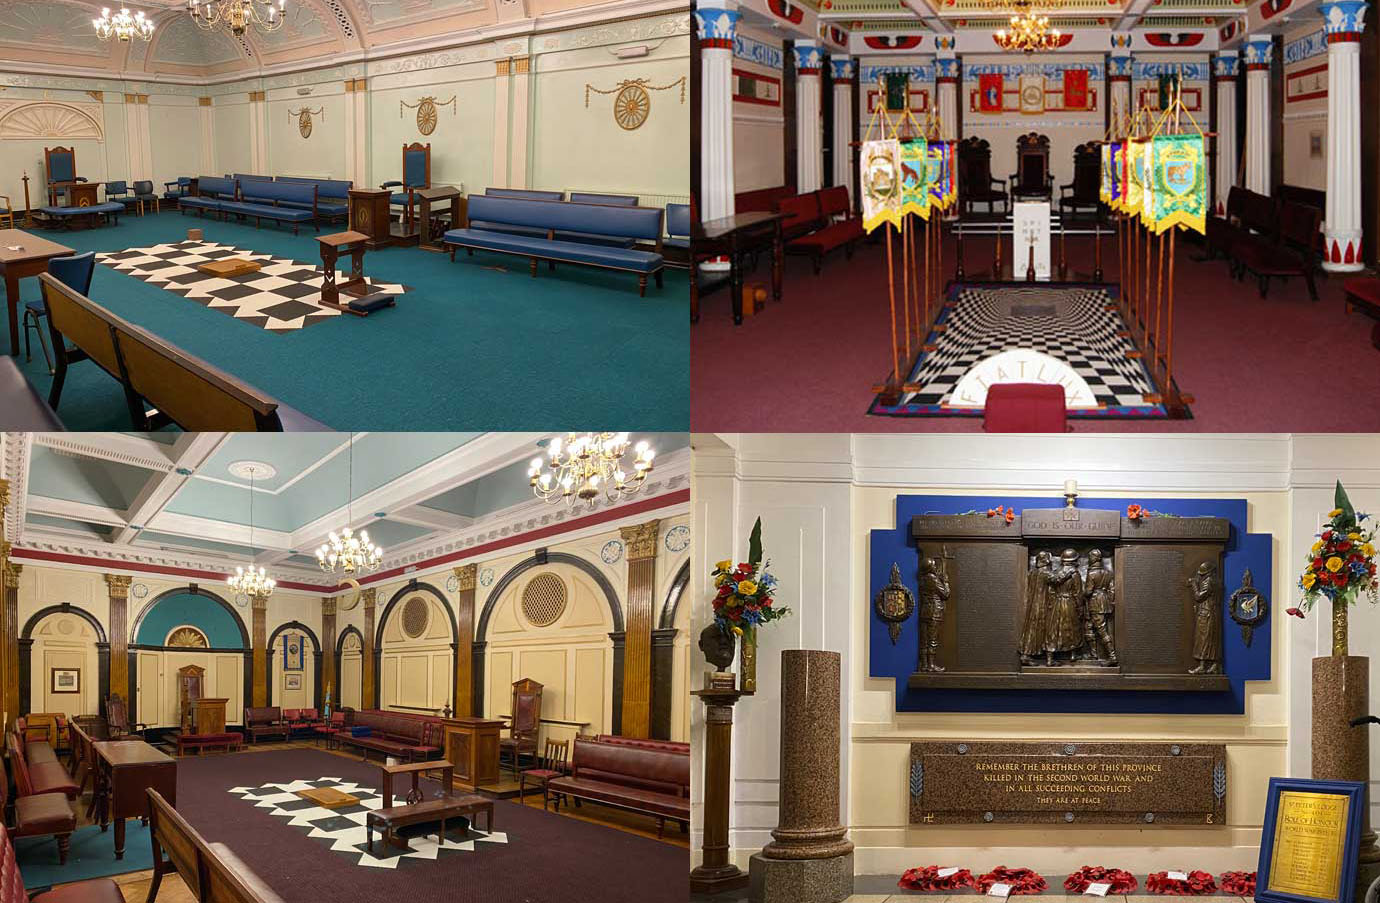 Pictured top left: The Adams Suite. Top right: The Egyptian Room. Bottom left: The Roman Room. Bottom right: The First World War Memorial. 